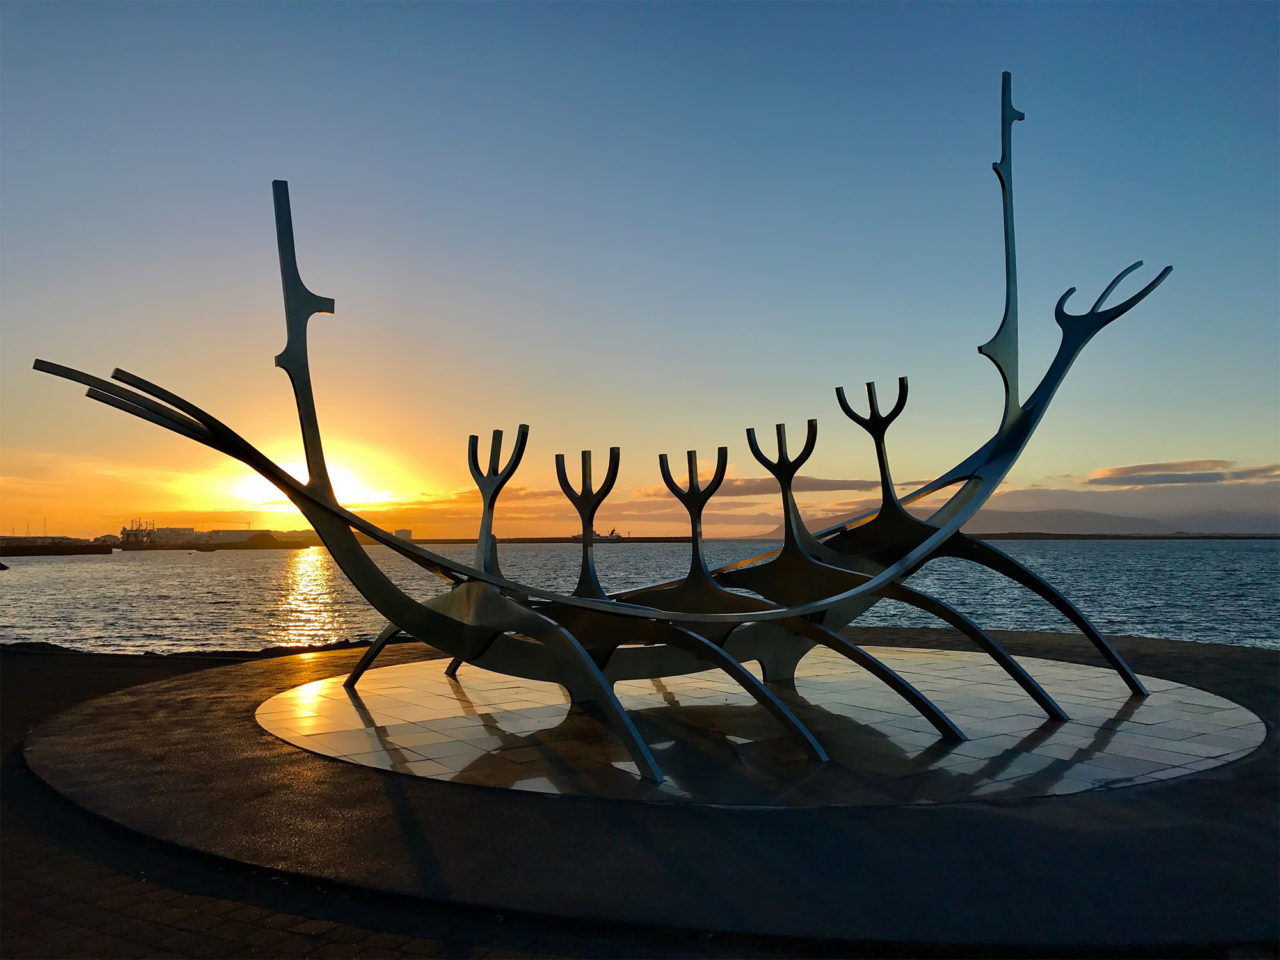 The Sun Voyager, Reykjavik – Most Beautiful Picture of the Day: November 22, 2017 – Most B ...